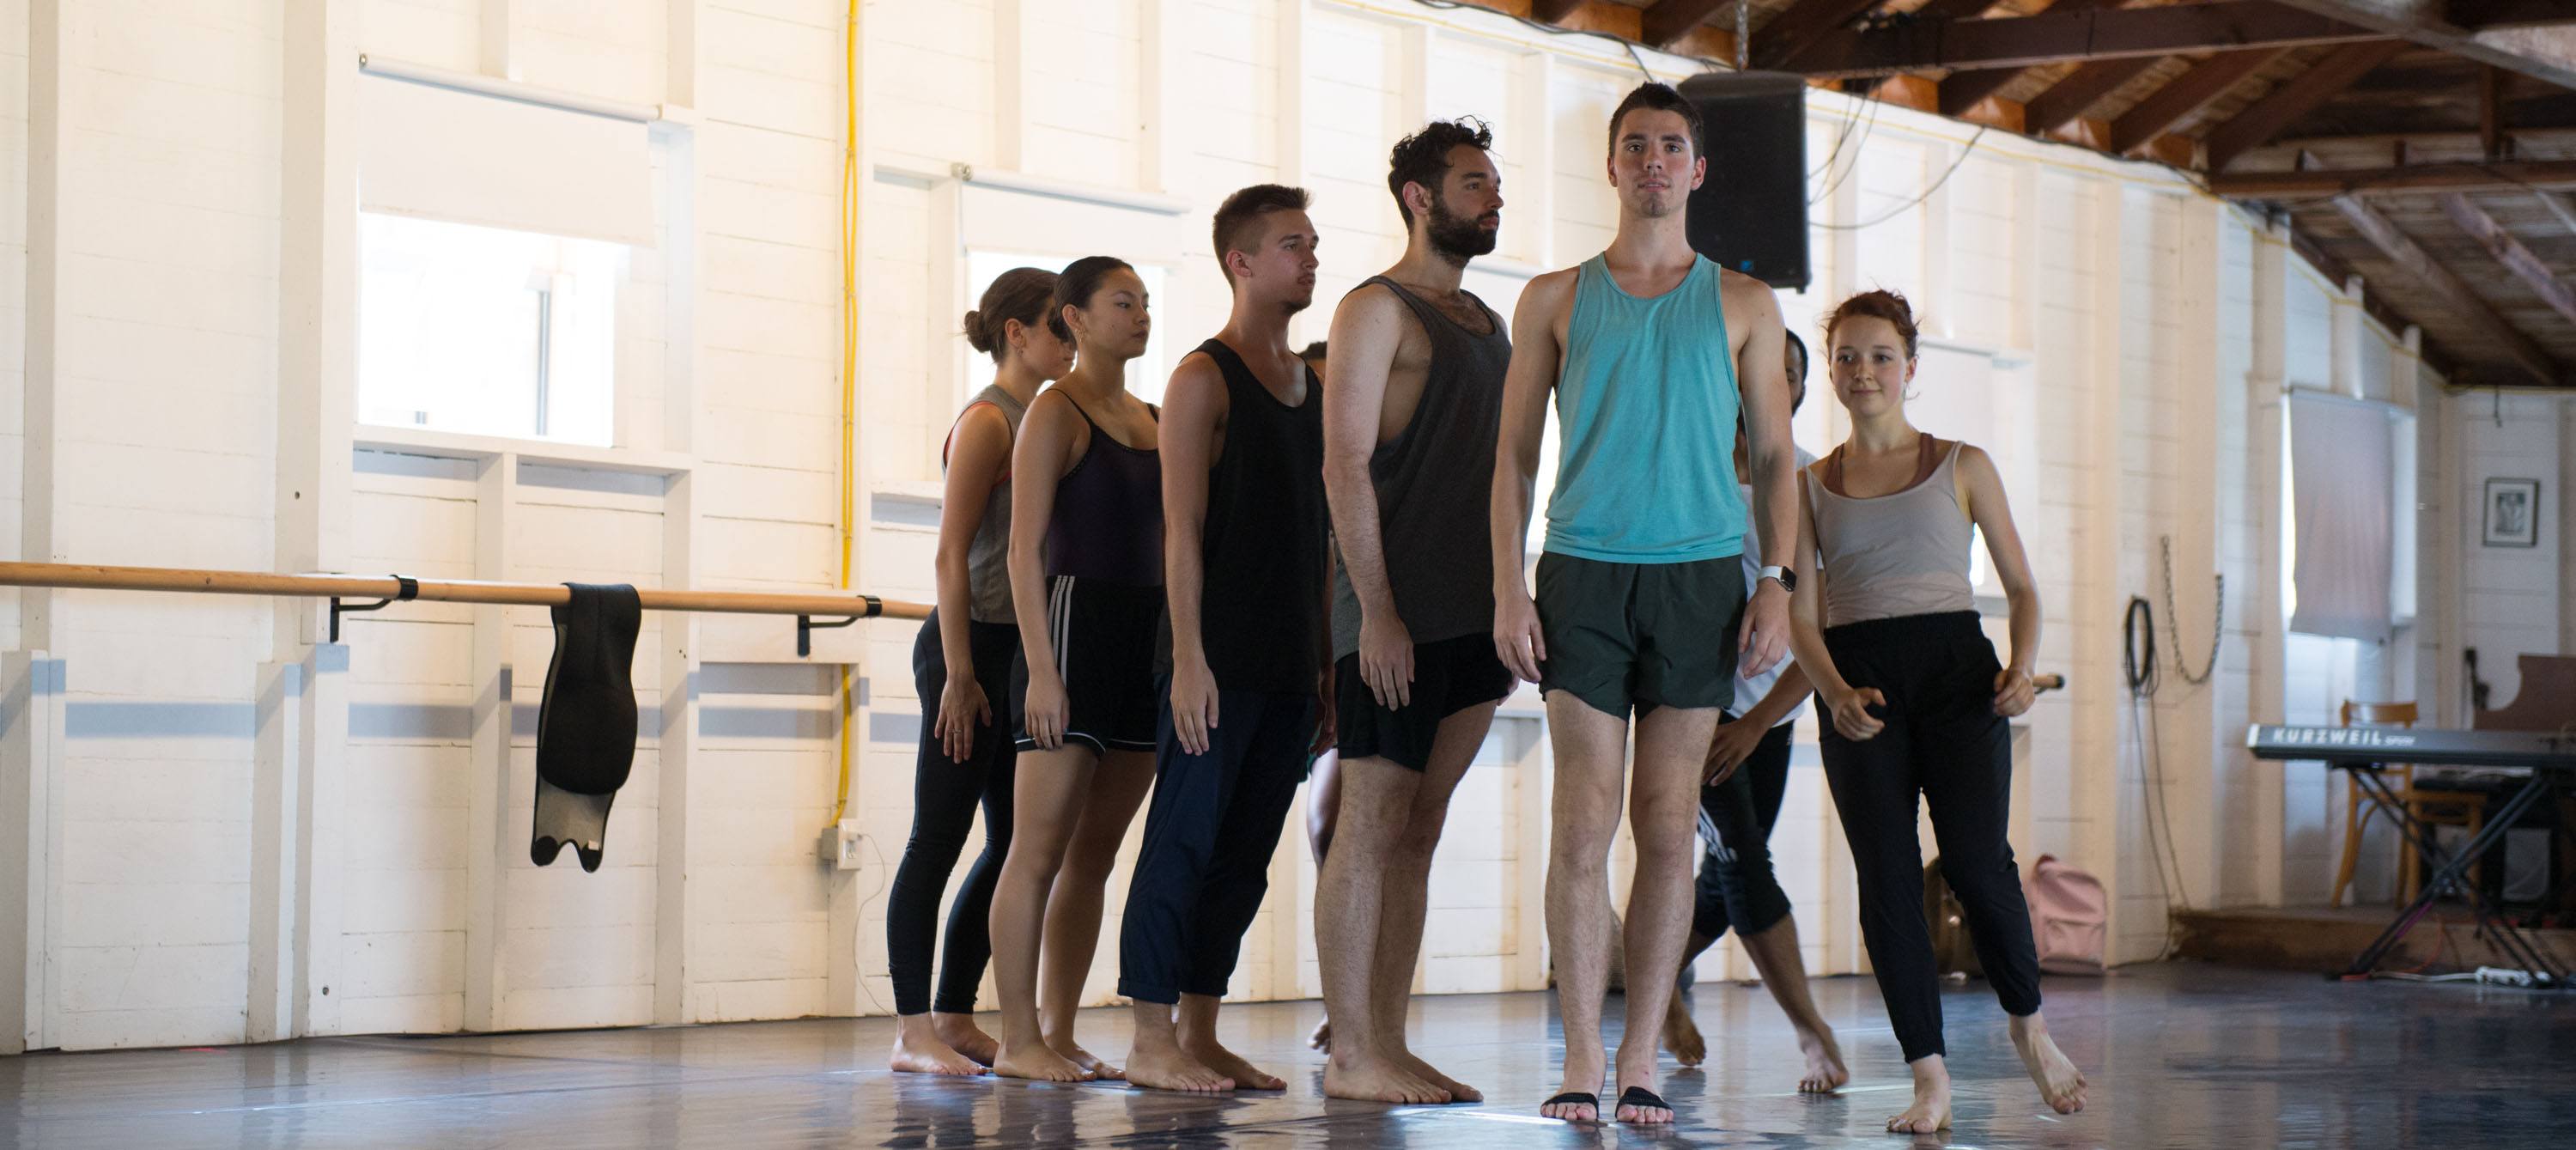 Contemporary Program working with Catherine Cabeen; photo Brooke Trisolini